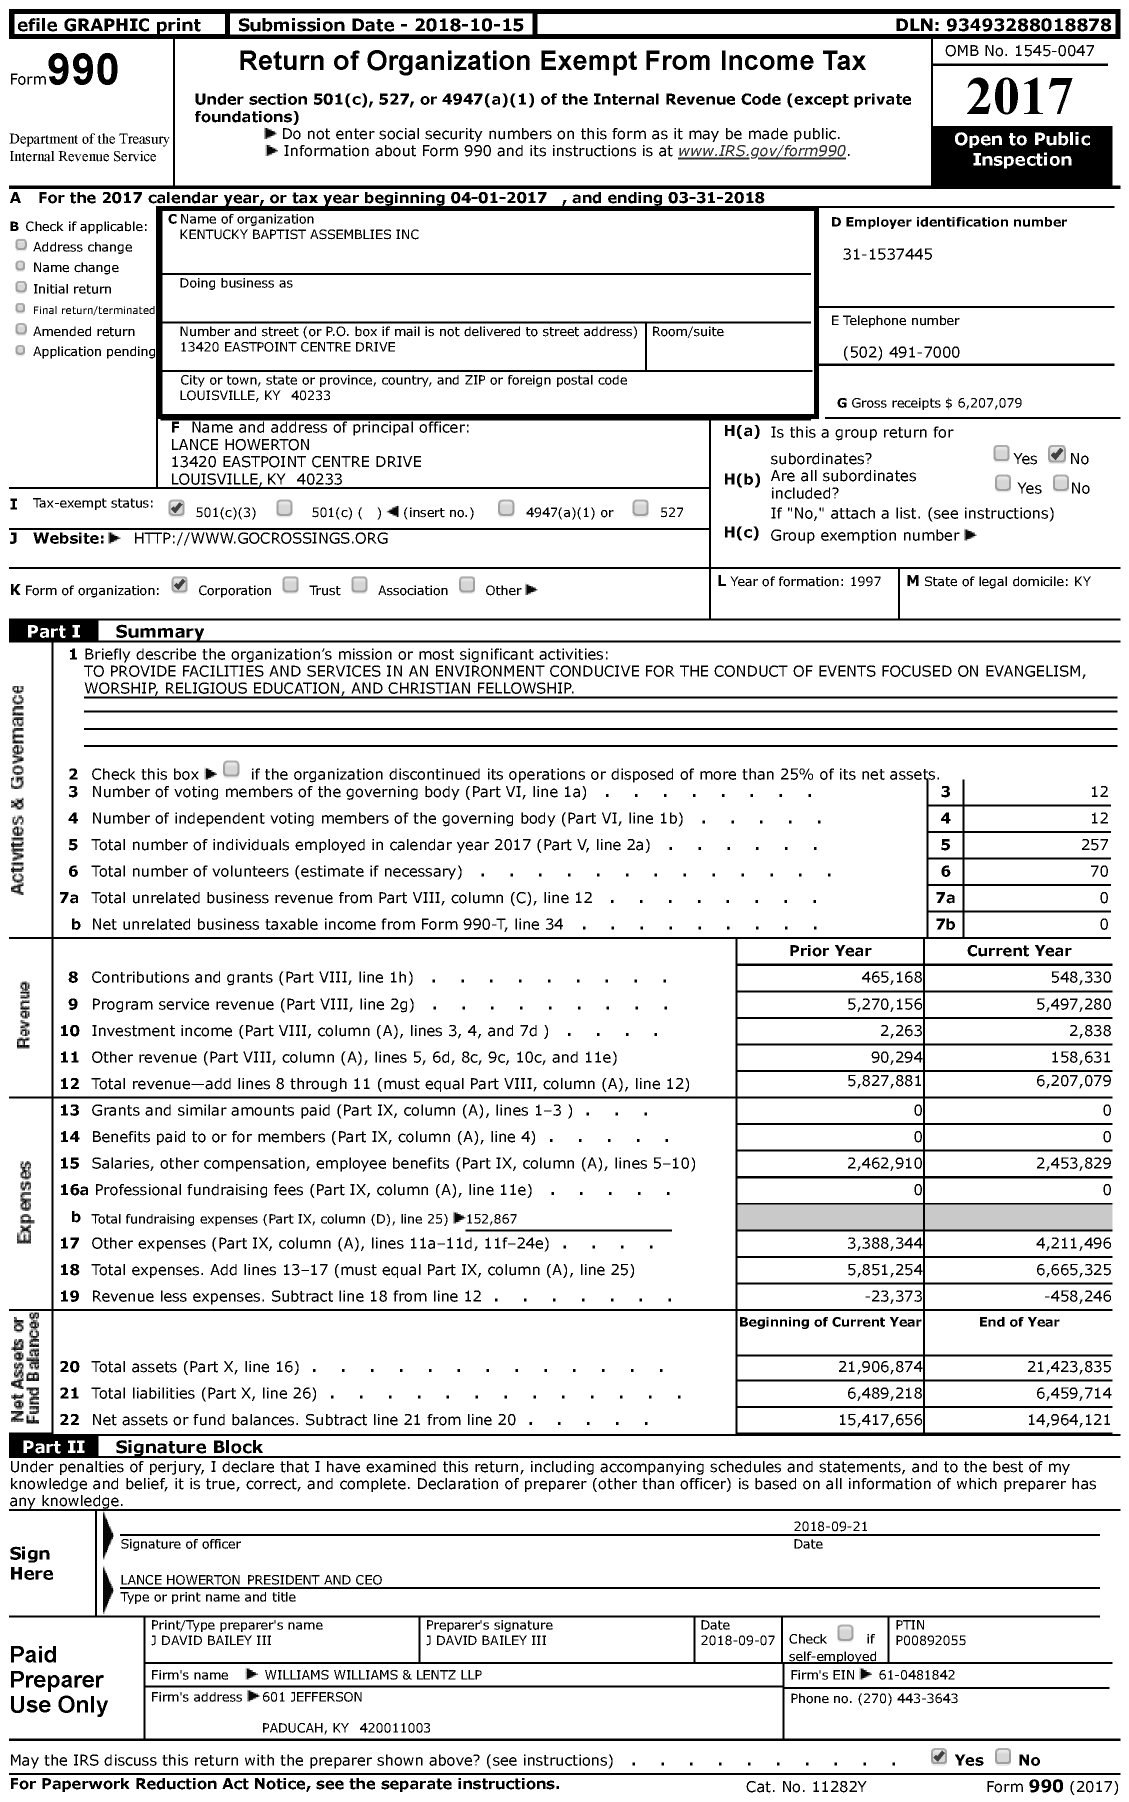 Image of first page of 2017 Form 990 for Kentucky Baptist Assemblies (KBC)